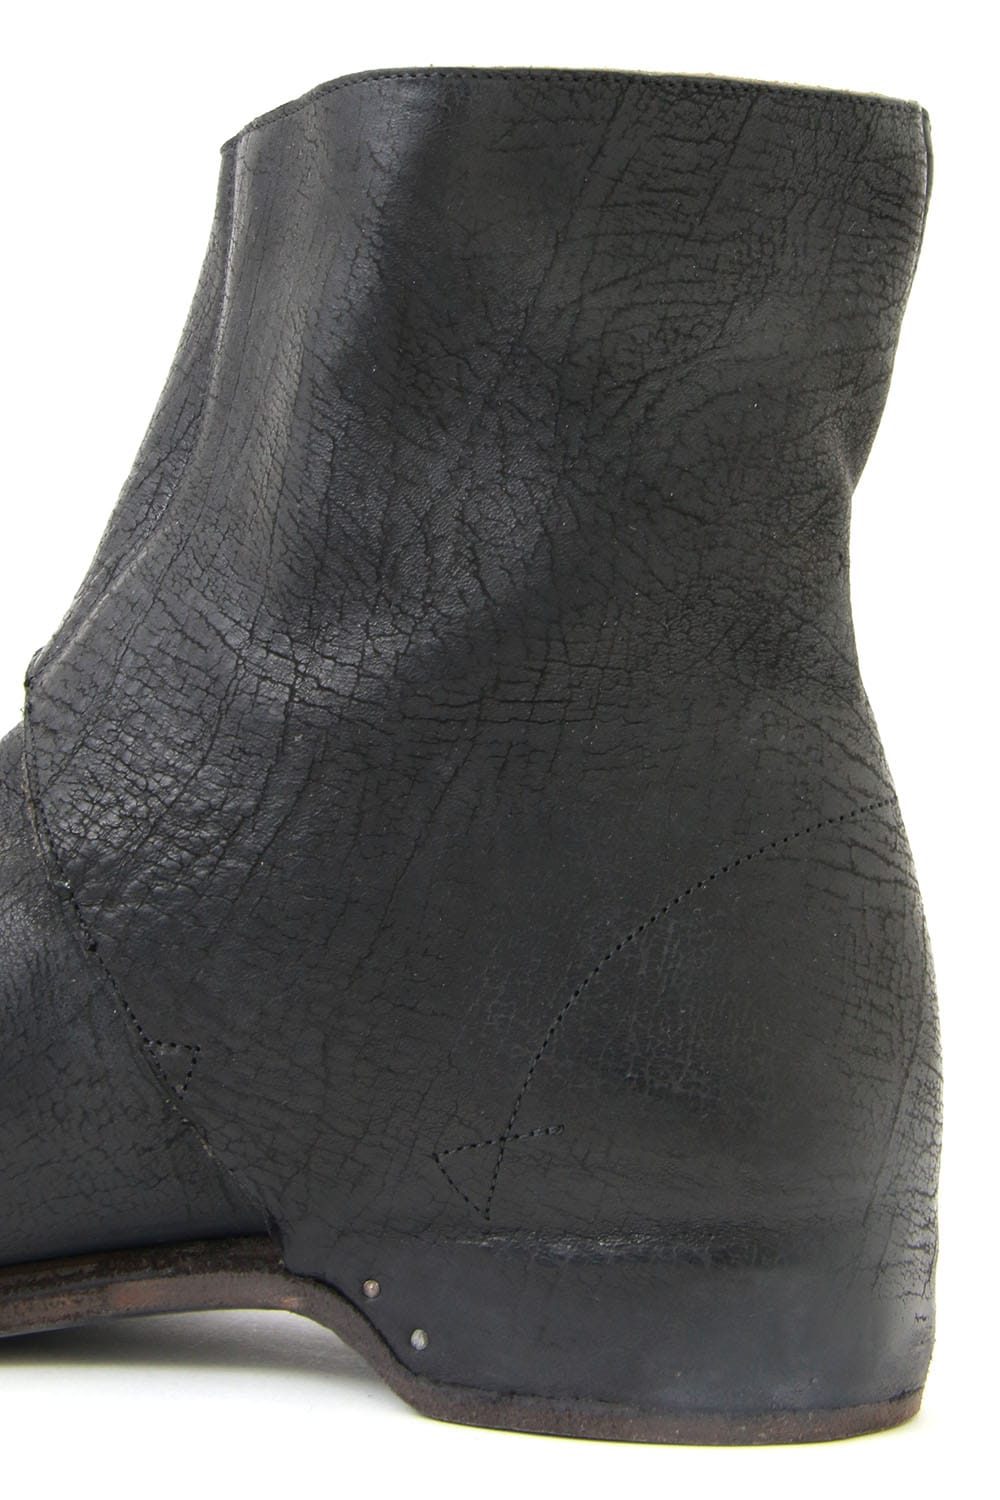 IS - FRONT ZIP WRAP BOOTS   _ IS_S22_OU_CCC1